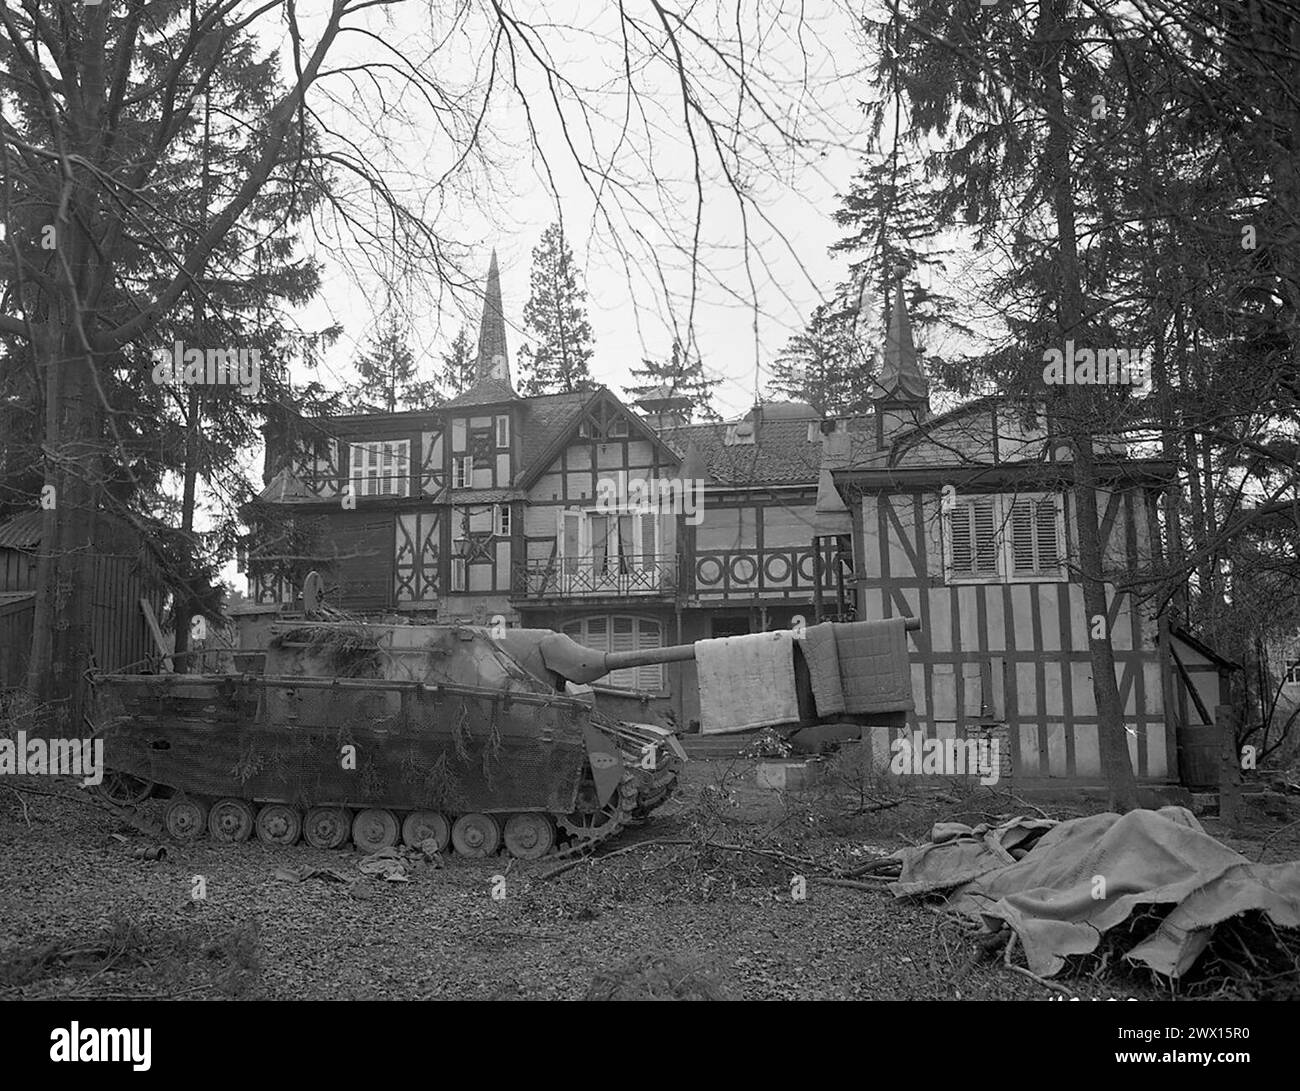 Original Caption: 'UEKERATH, GERMANY. This German self-propelled gun was knocked out by the 78th Division, 1st U.S. Army, as the 1st Army drove deeper into Germany.' ca. March 1945 Stock Photo